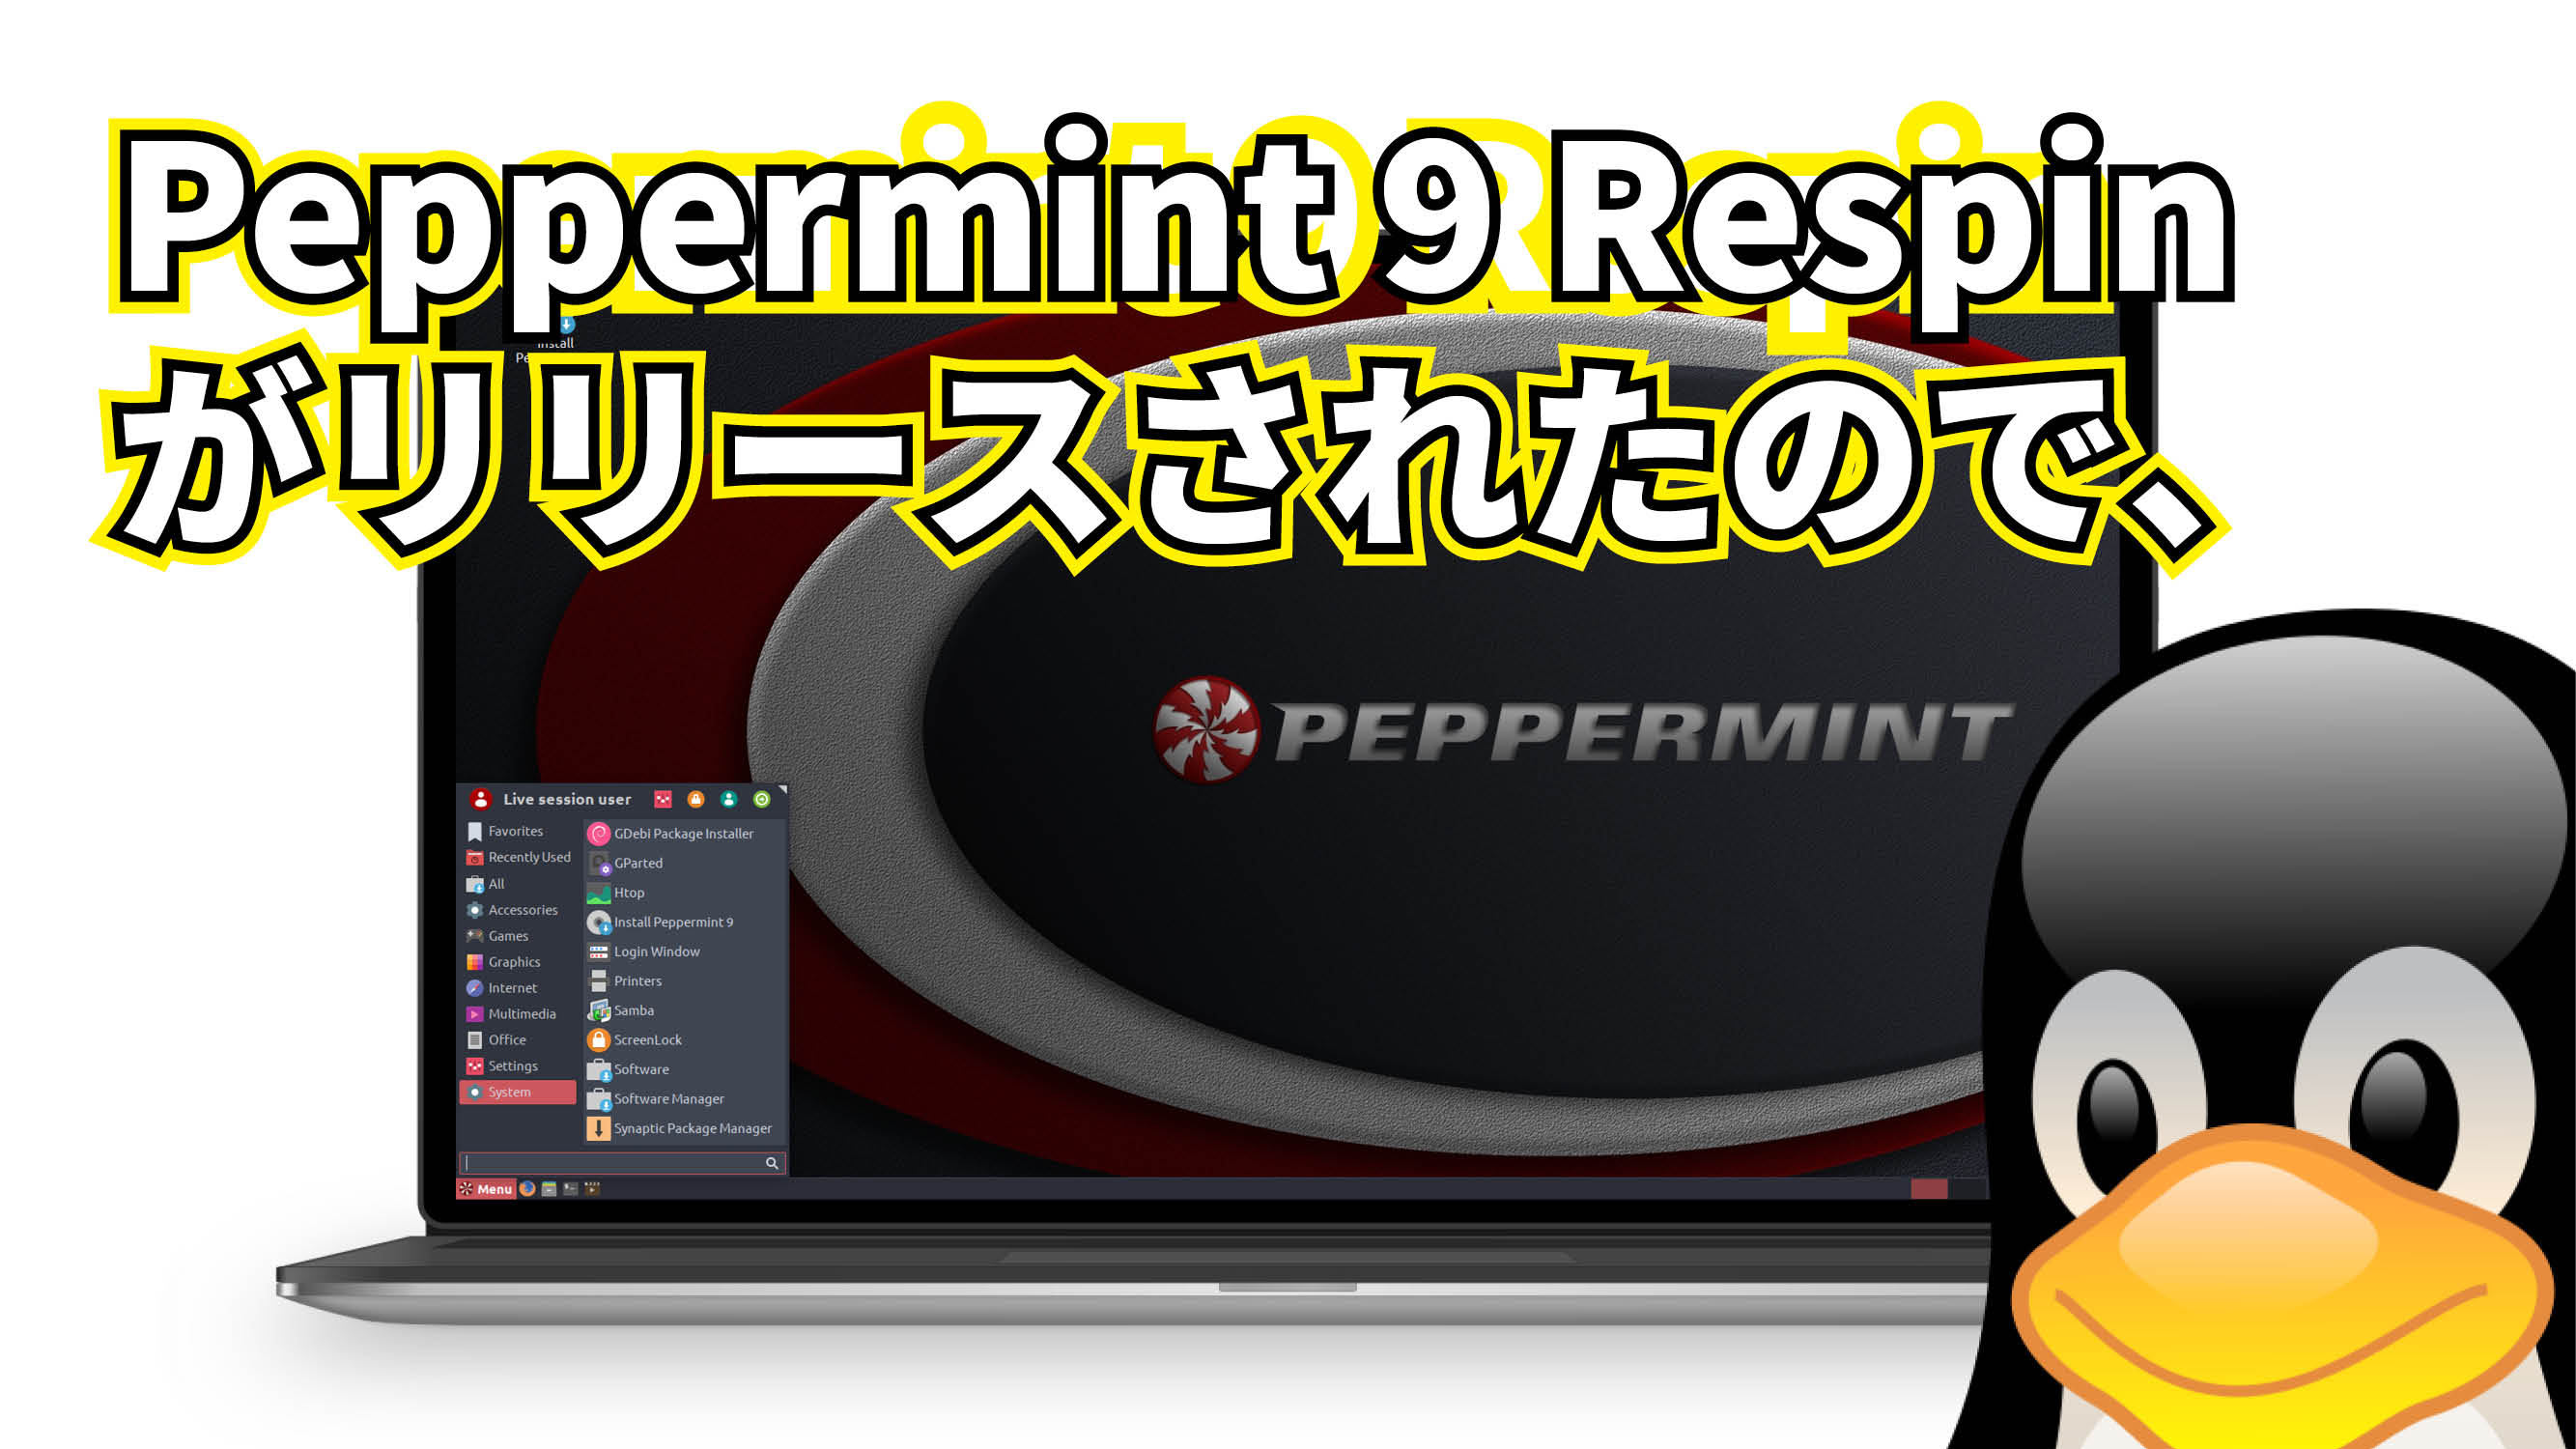 Peppermint 9 Respin がリリースされたので、